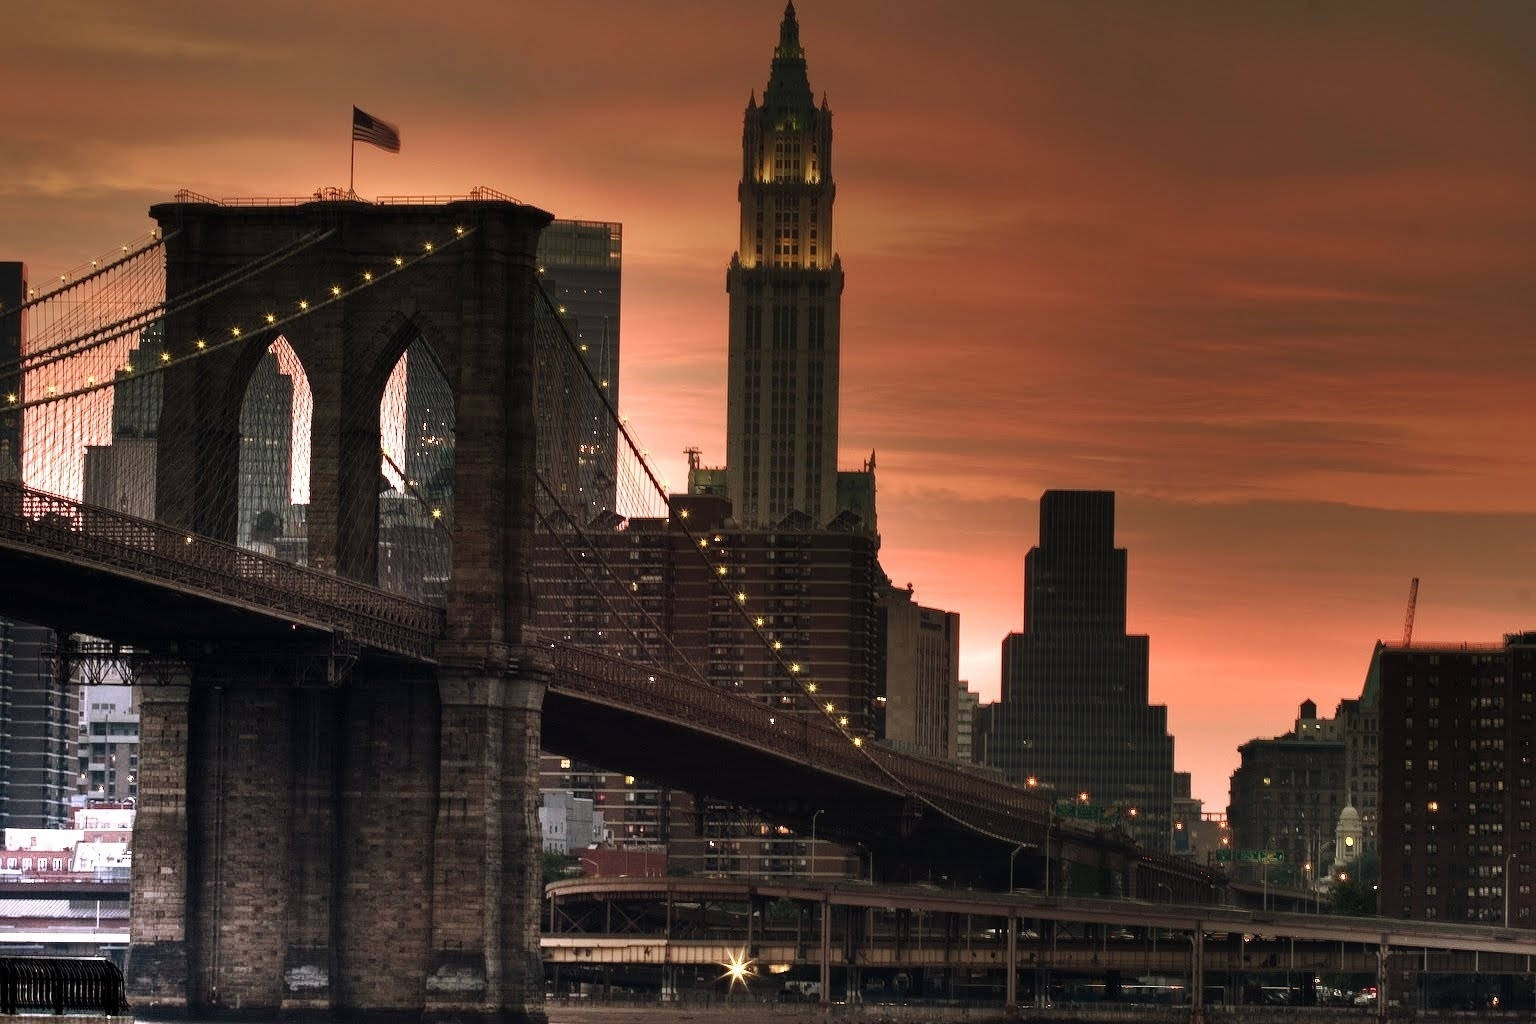 When In New York, The Brooklyn Bridge Needs To Be On Your Must-see List! Wallpaper